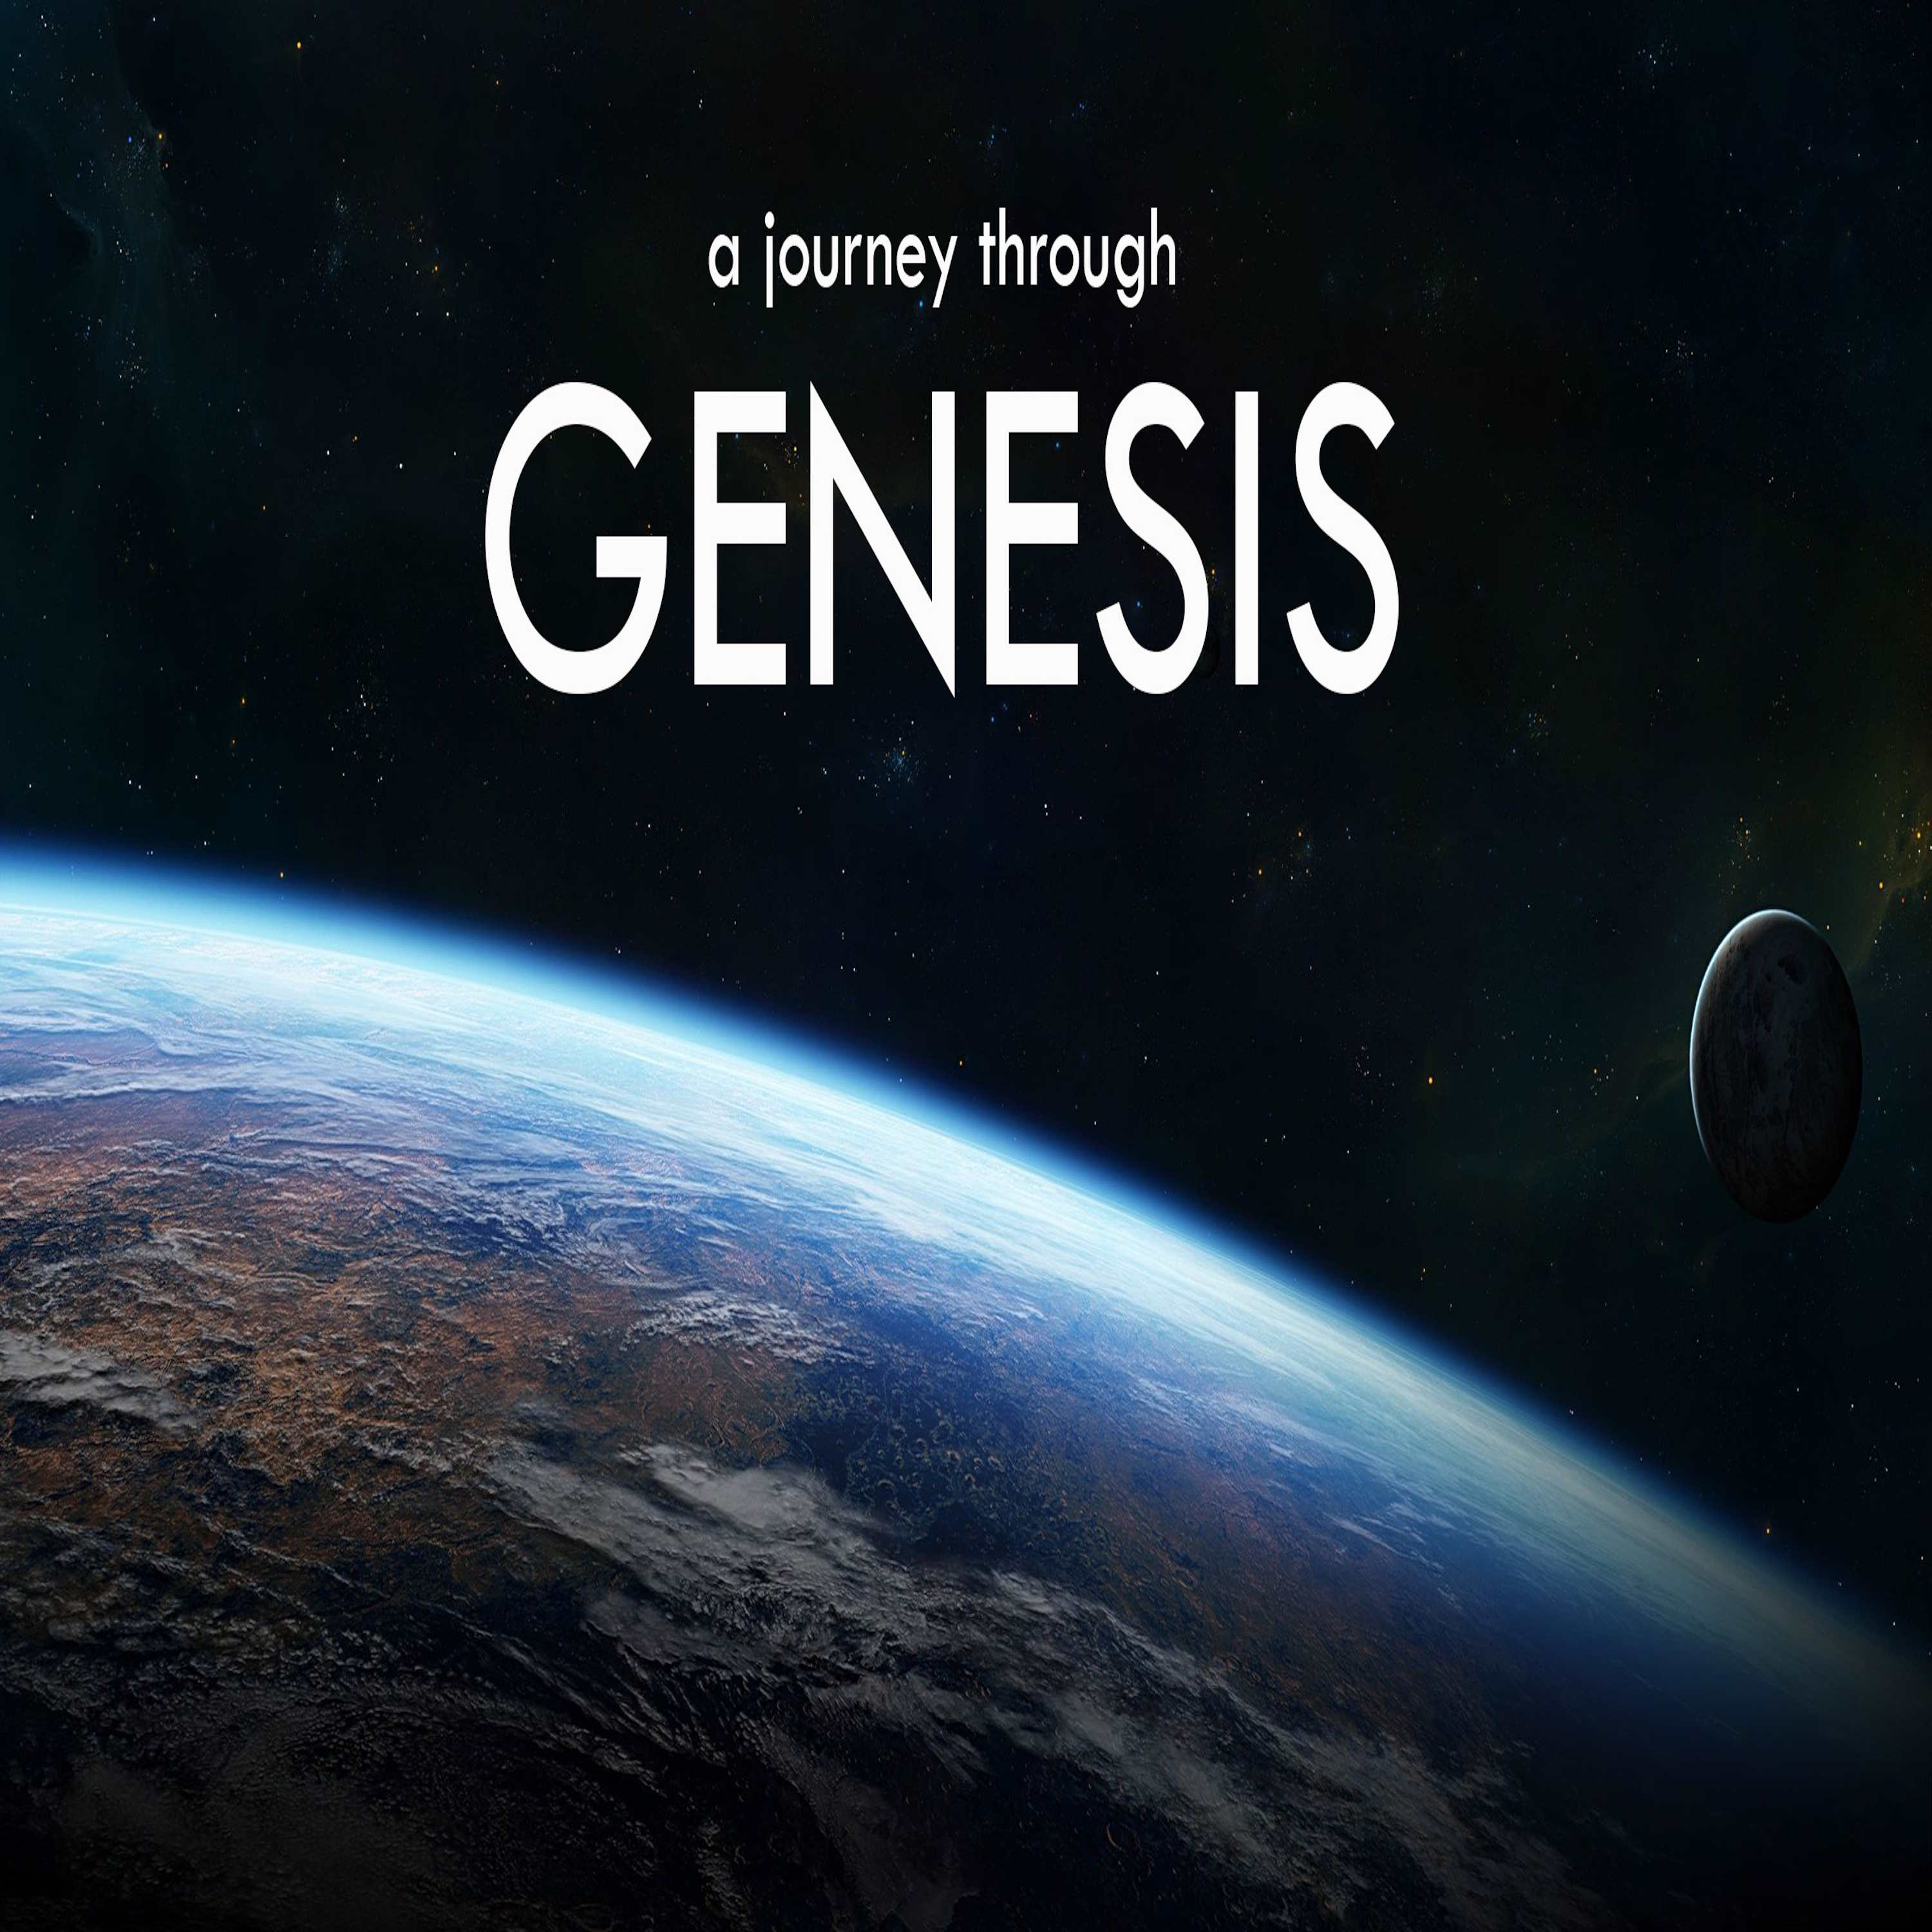 Genesis Creation Series: Why Are You Angry? (Genesis 4:1-12)